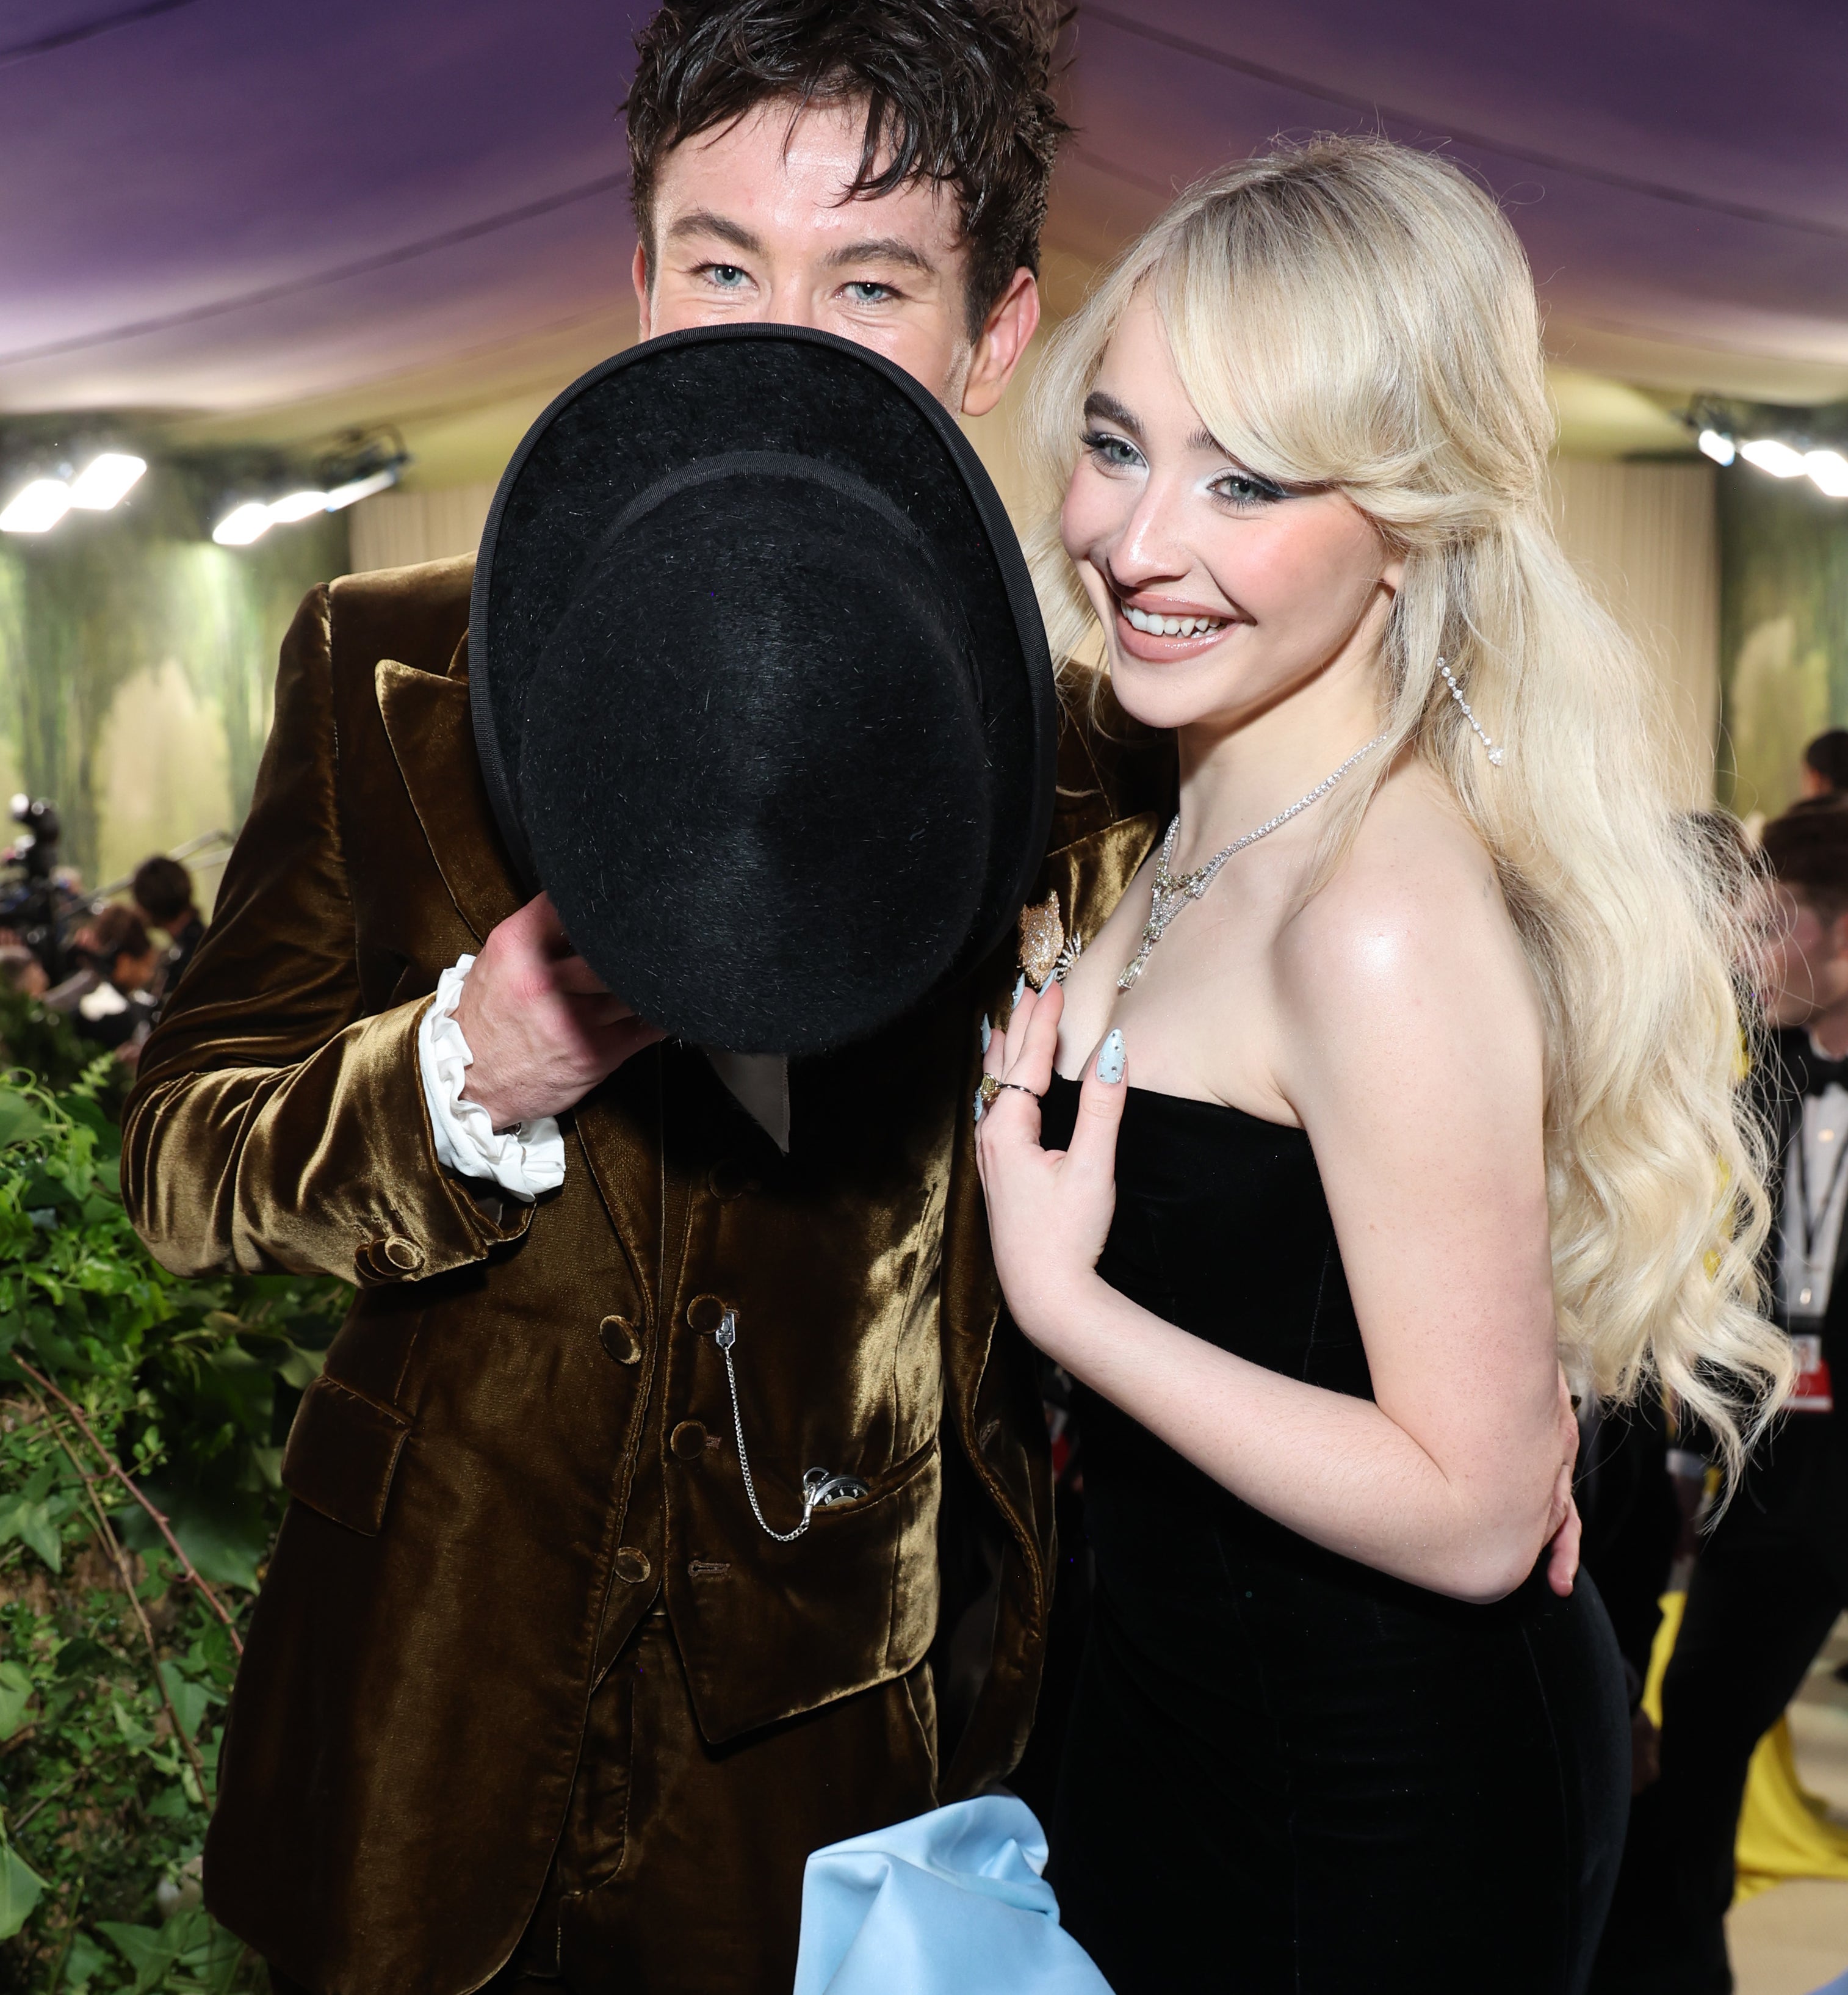 Barry Keoghan holding a hat partly covering his face, and Sabrina smiling, both dressed in elegant attire at a formal event